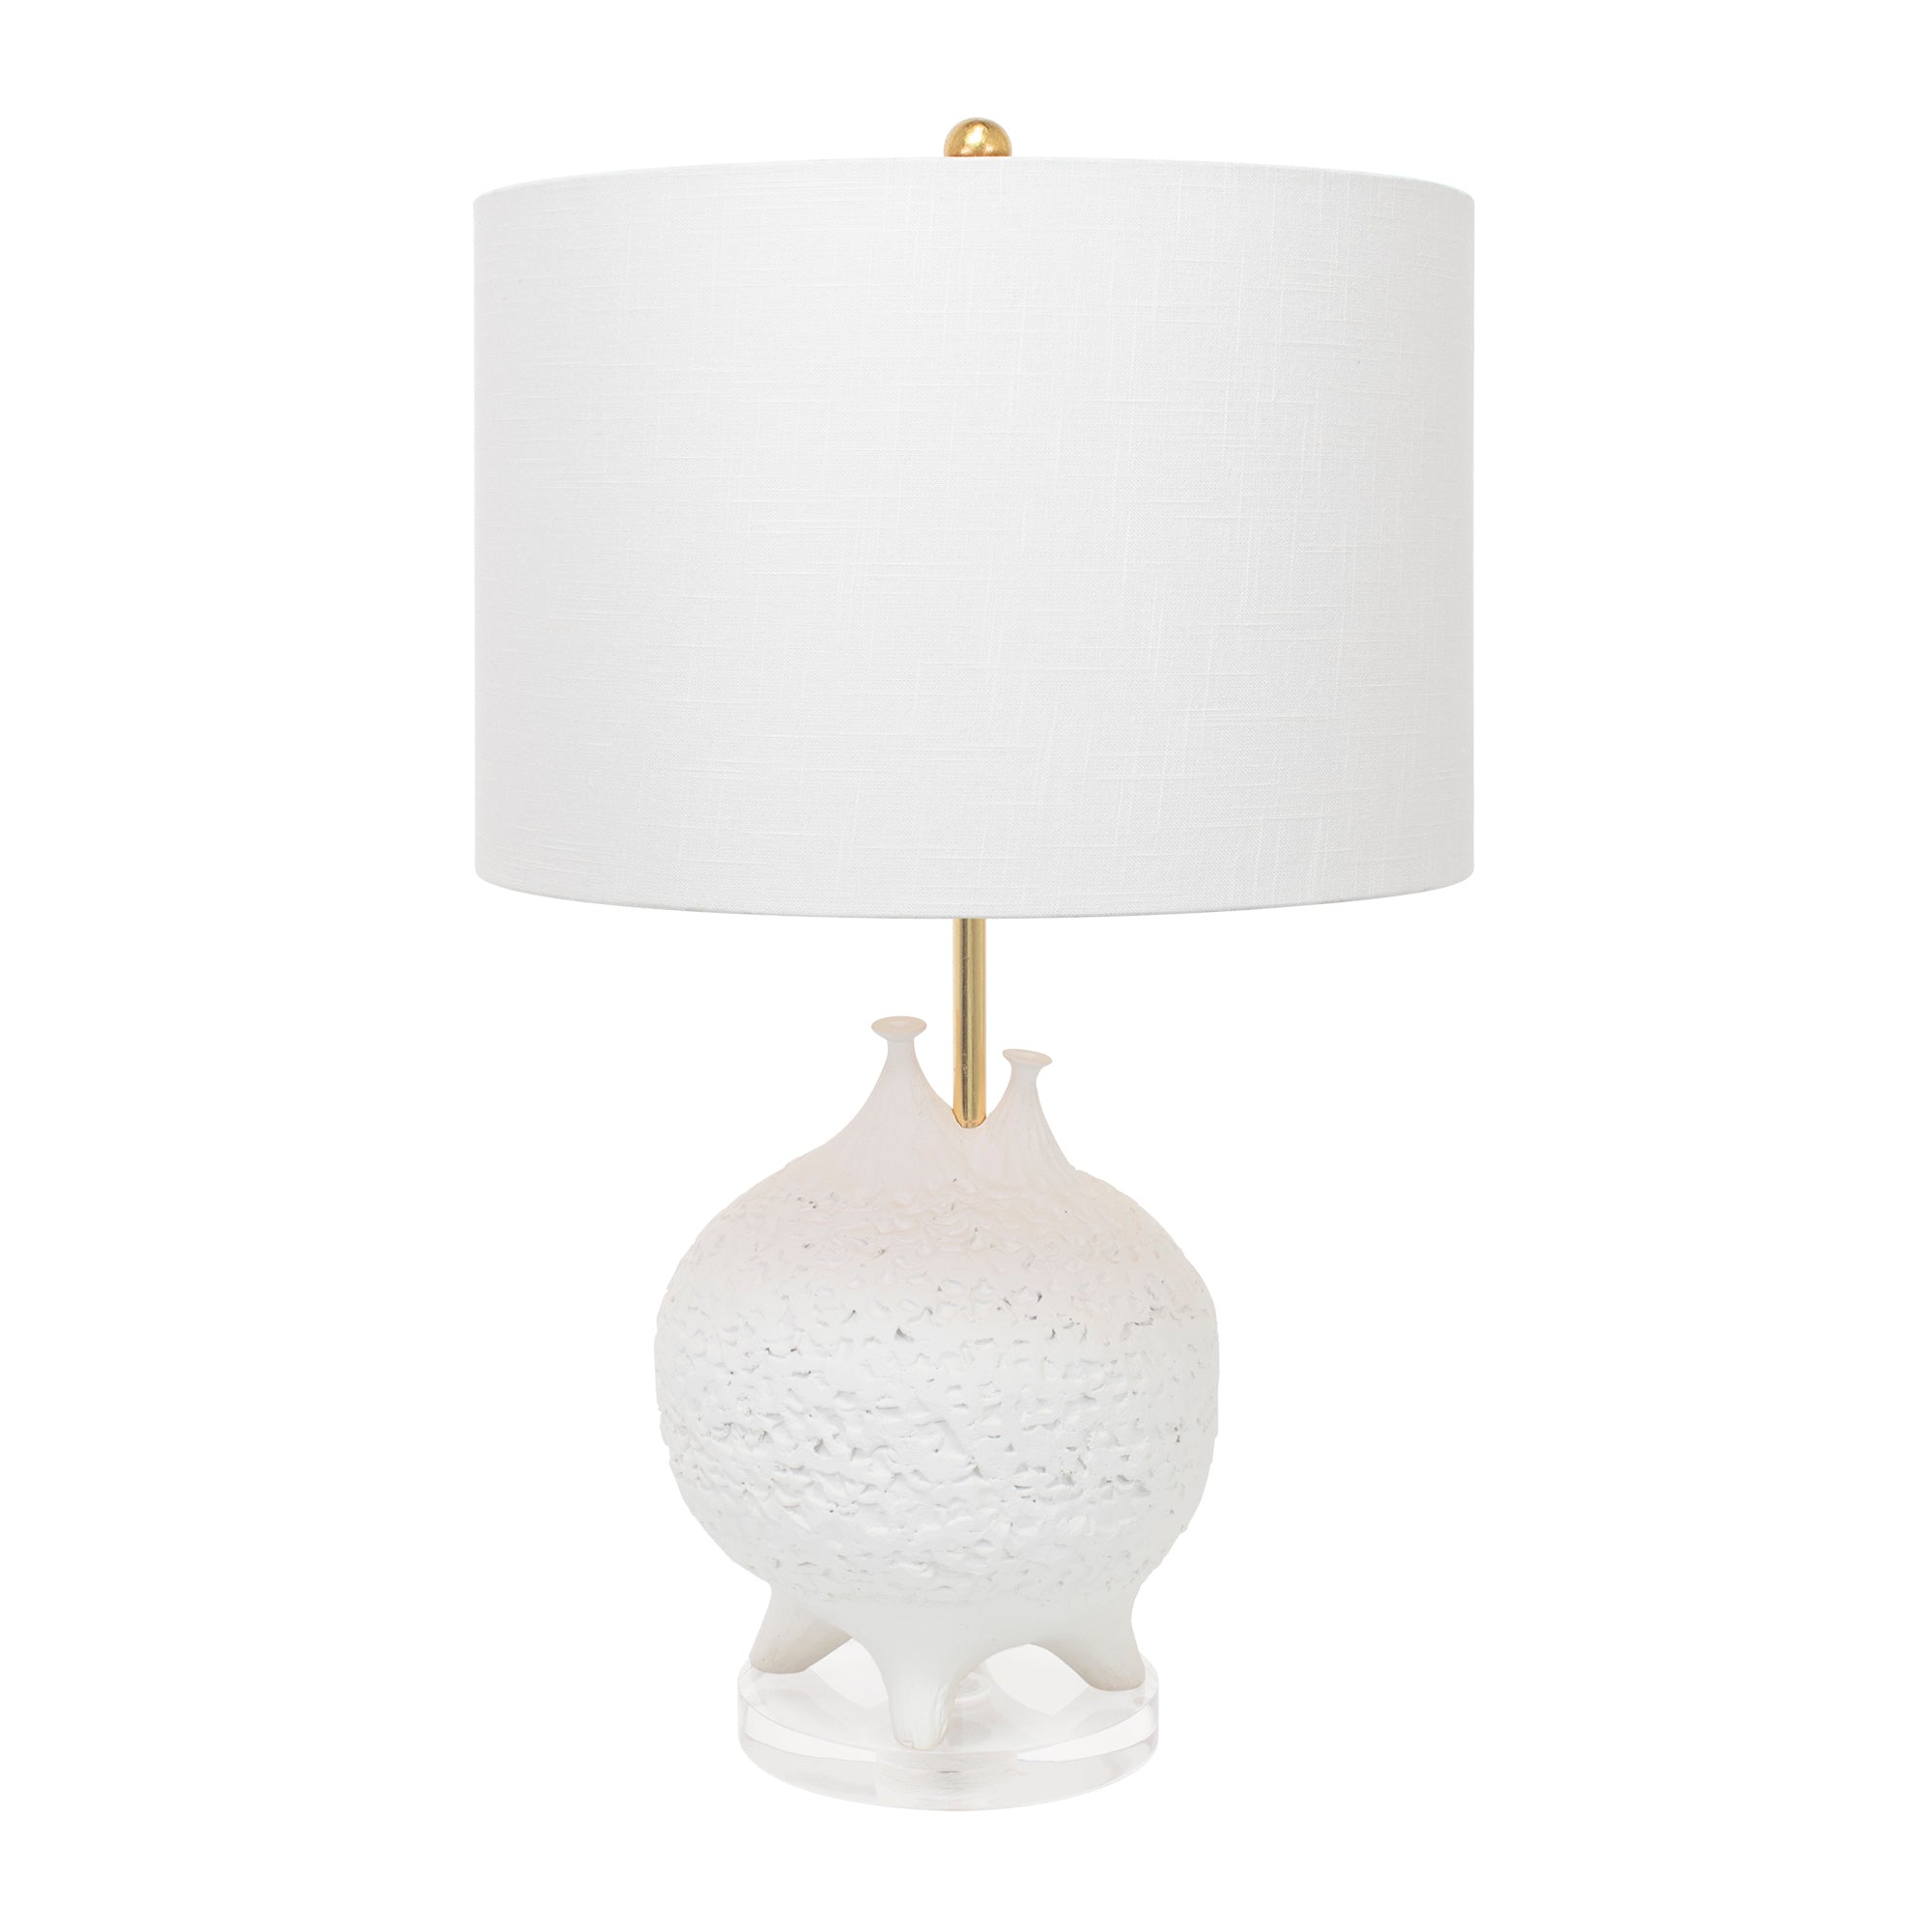 Luna White Table Lamp - Couture Lamps